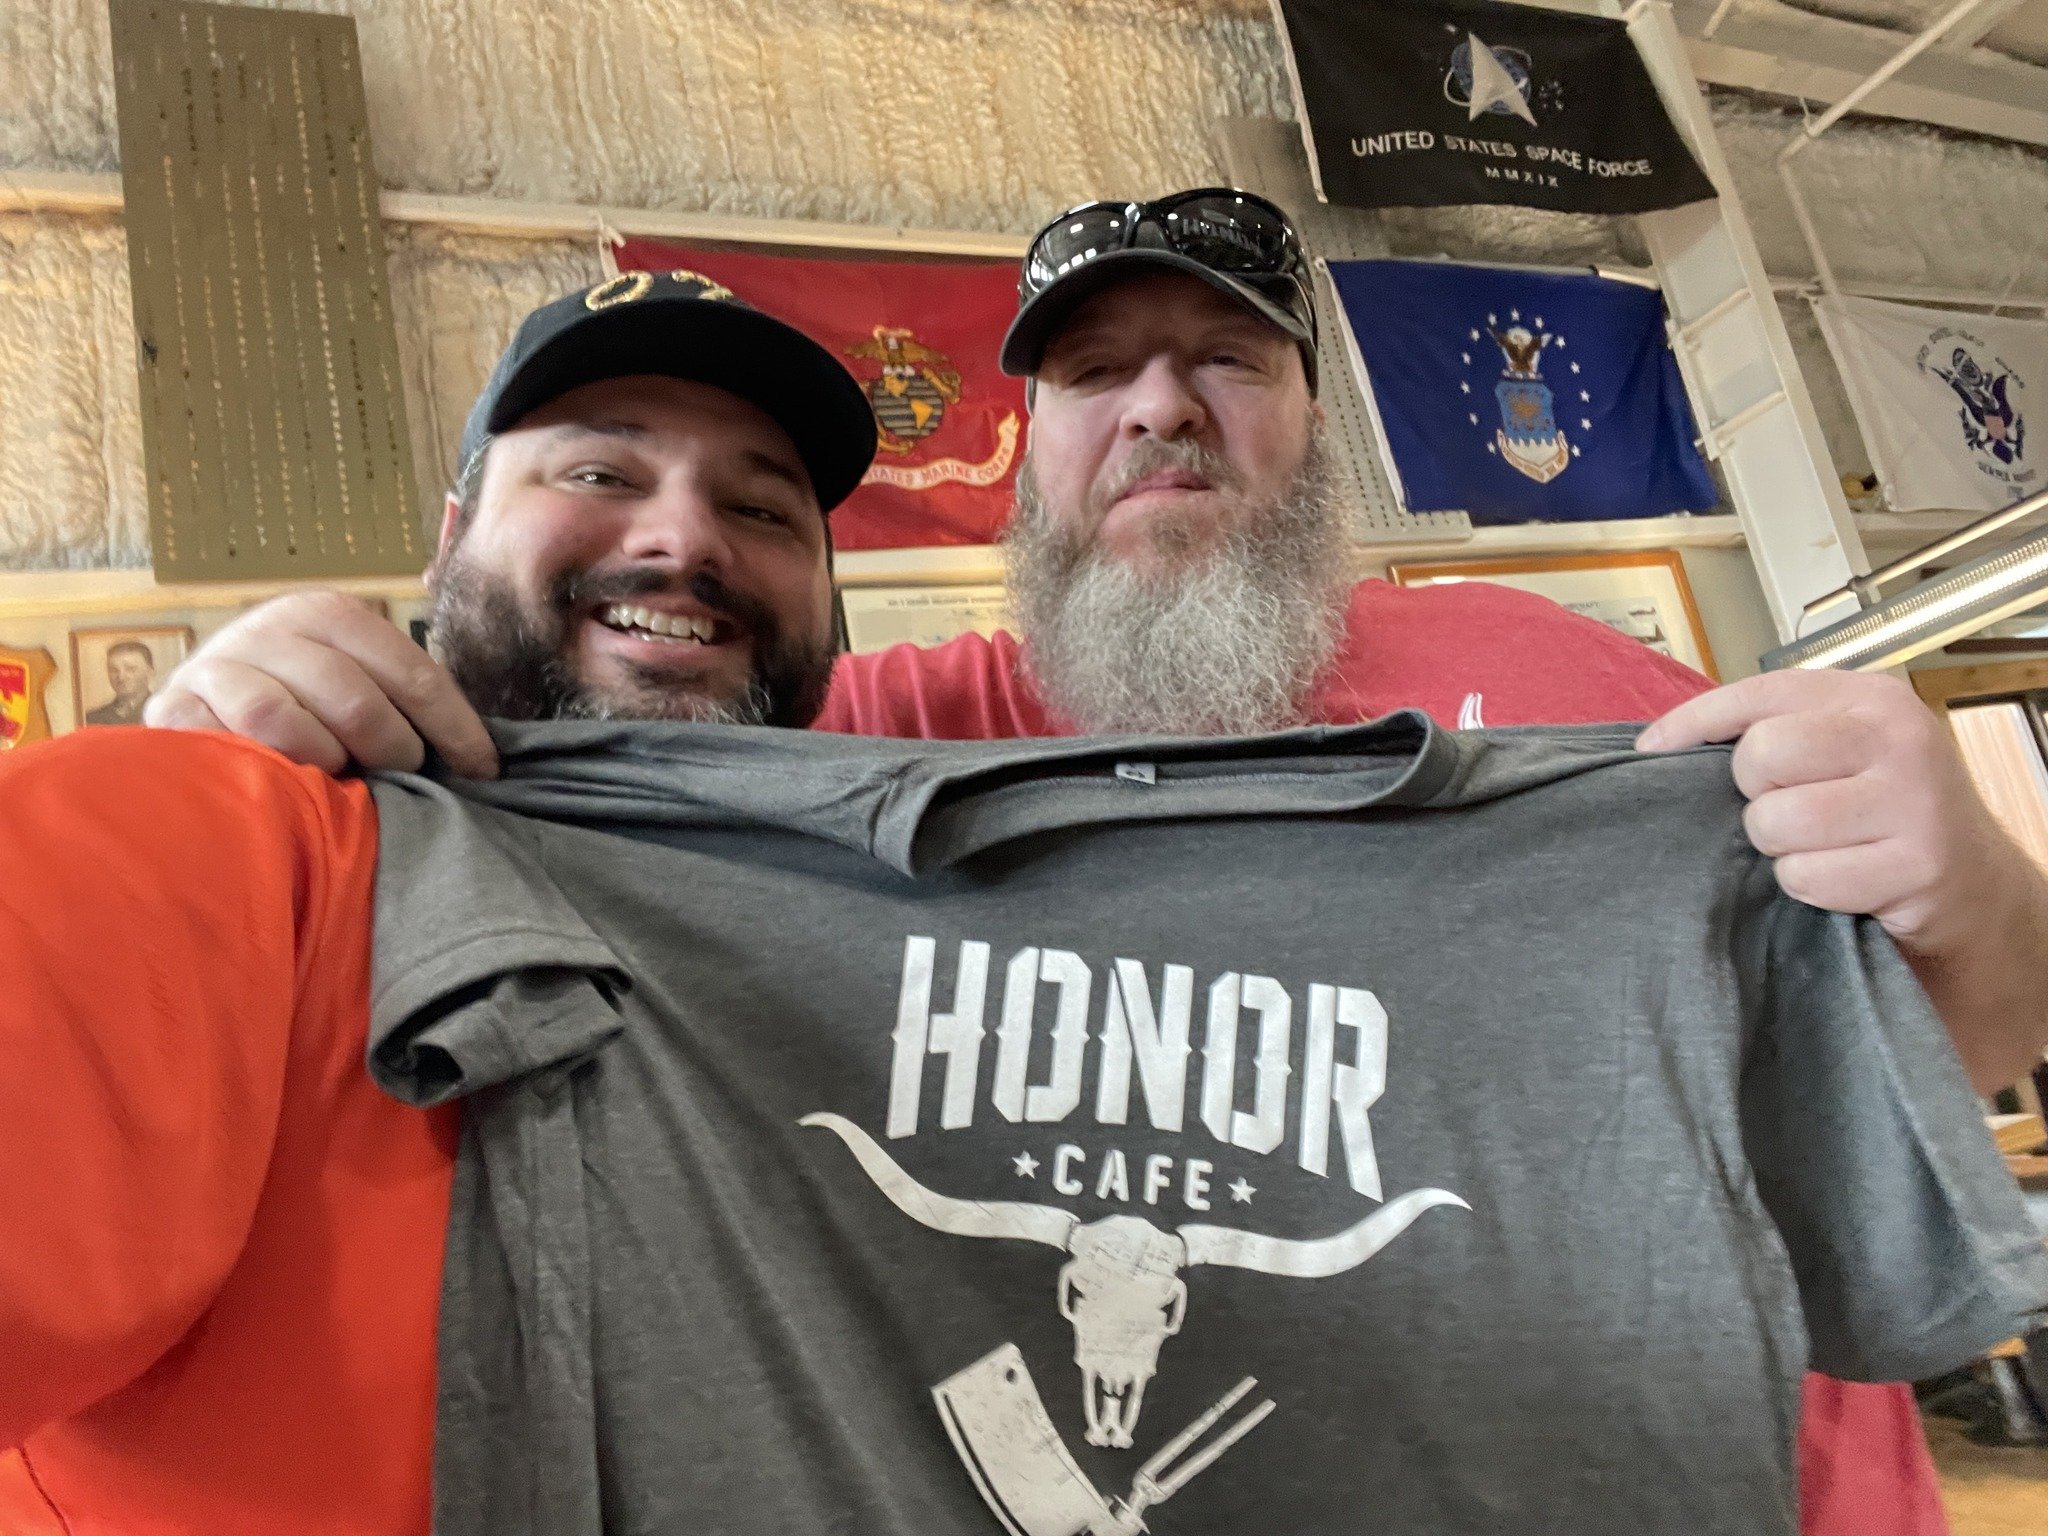 Recently, a dream of ours came true and we got to make some shirts for @honorcafeconroe. I got to make this design for Chris, the owner, and since Chris is a @marines  Veteran I made the handles of the cleaver and carving fork the same as the handle 